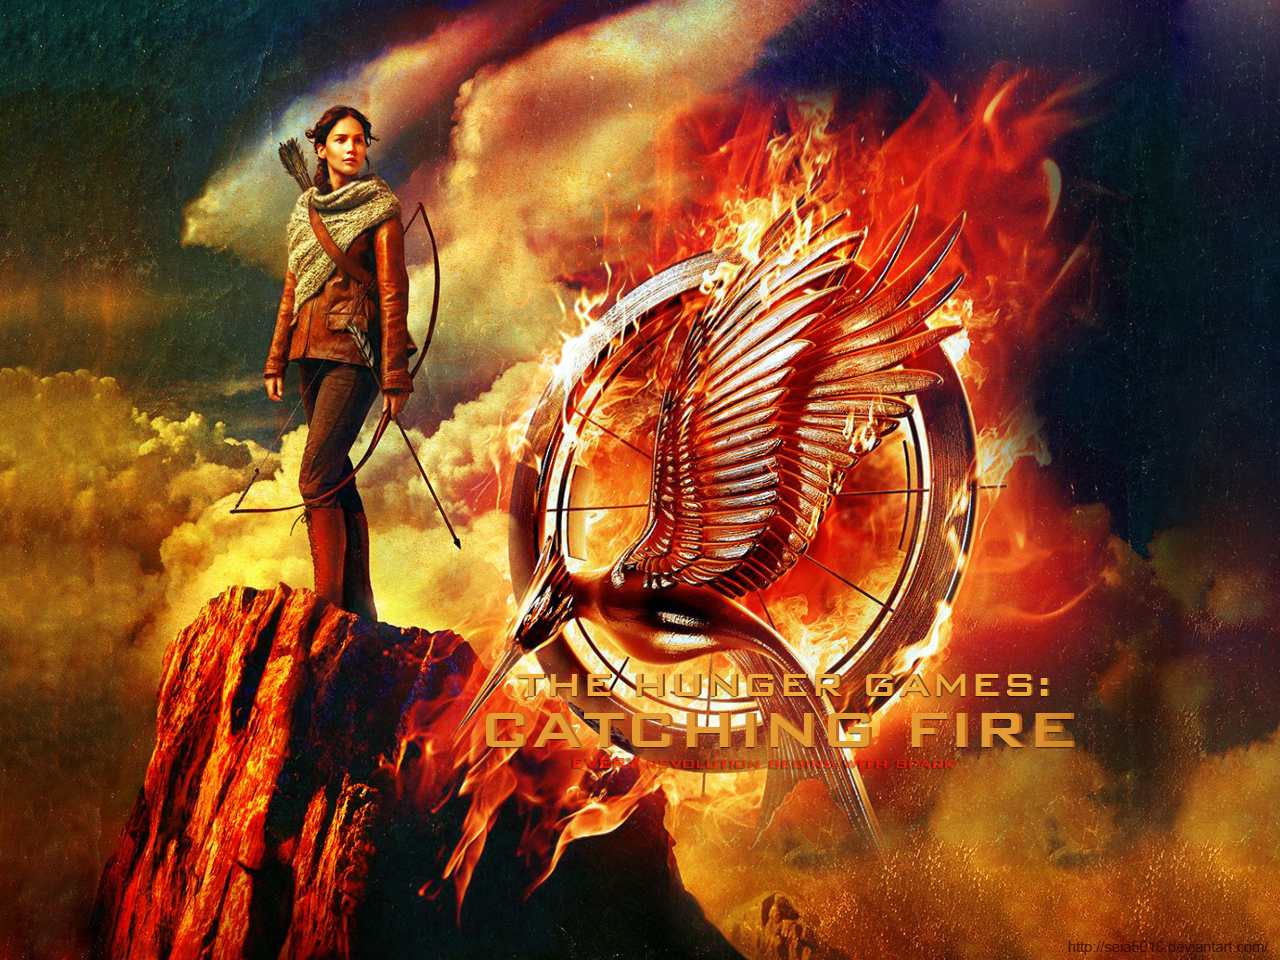 The Hunger Games Catching Fire Wallpaper By Seia5018 On